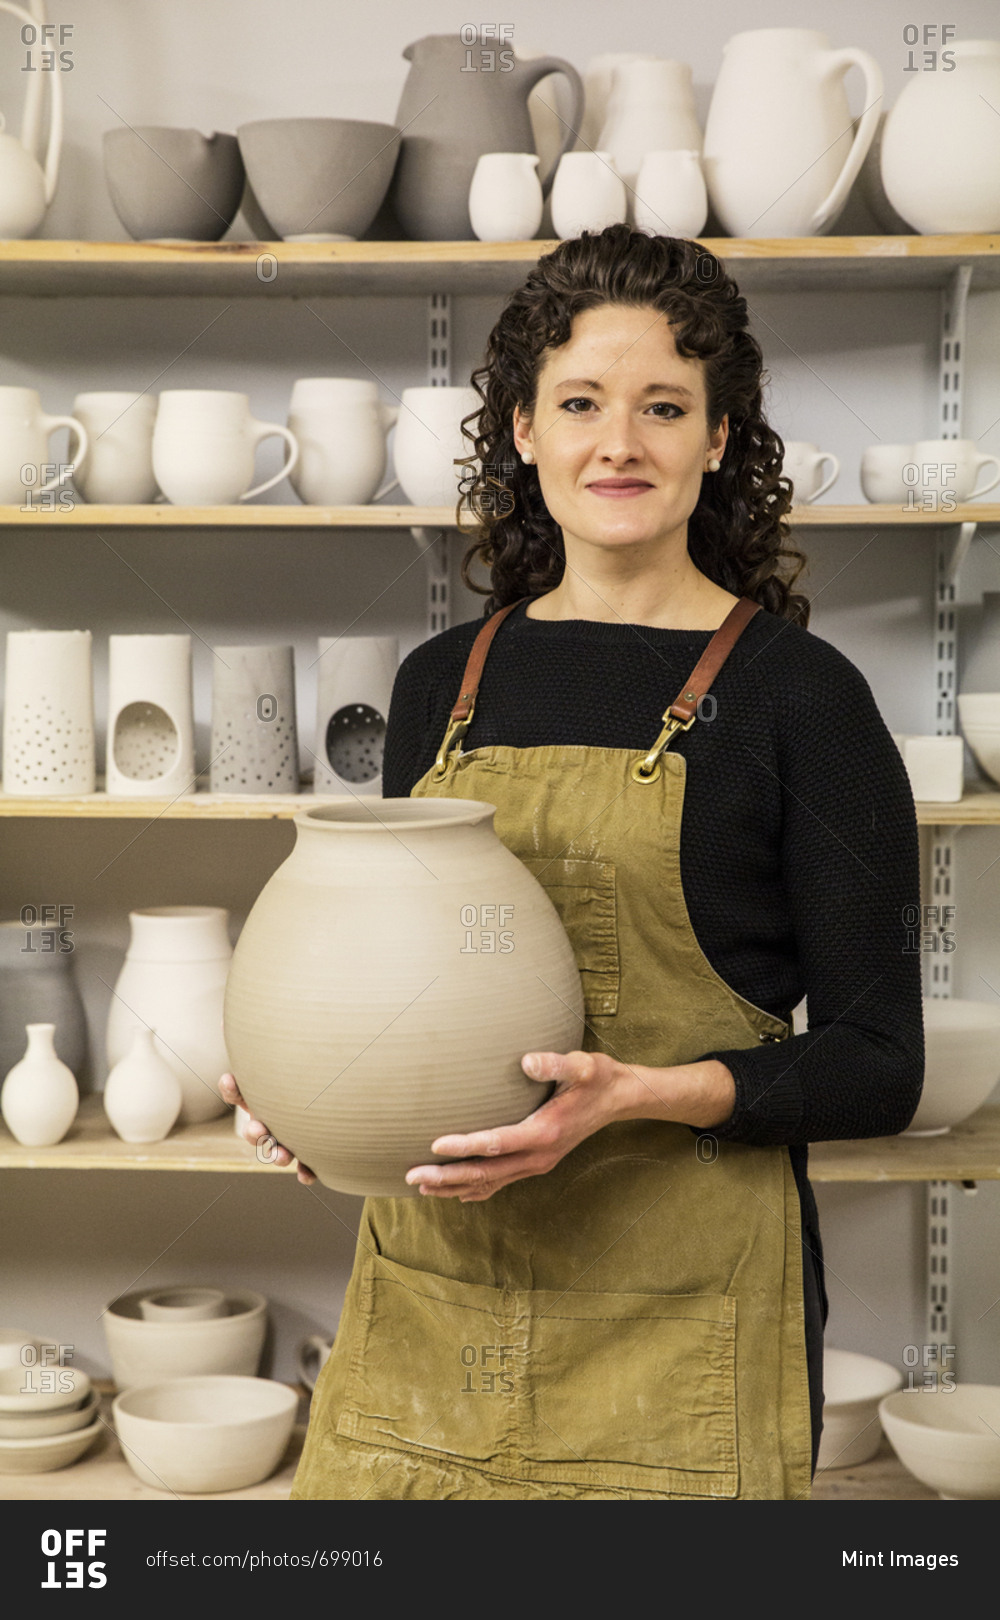 Woman with curly brown hair wearing apron holding unfired spherical clay vase